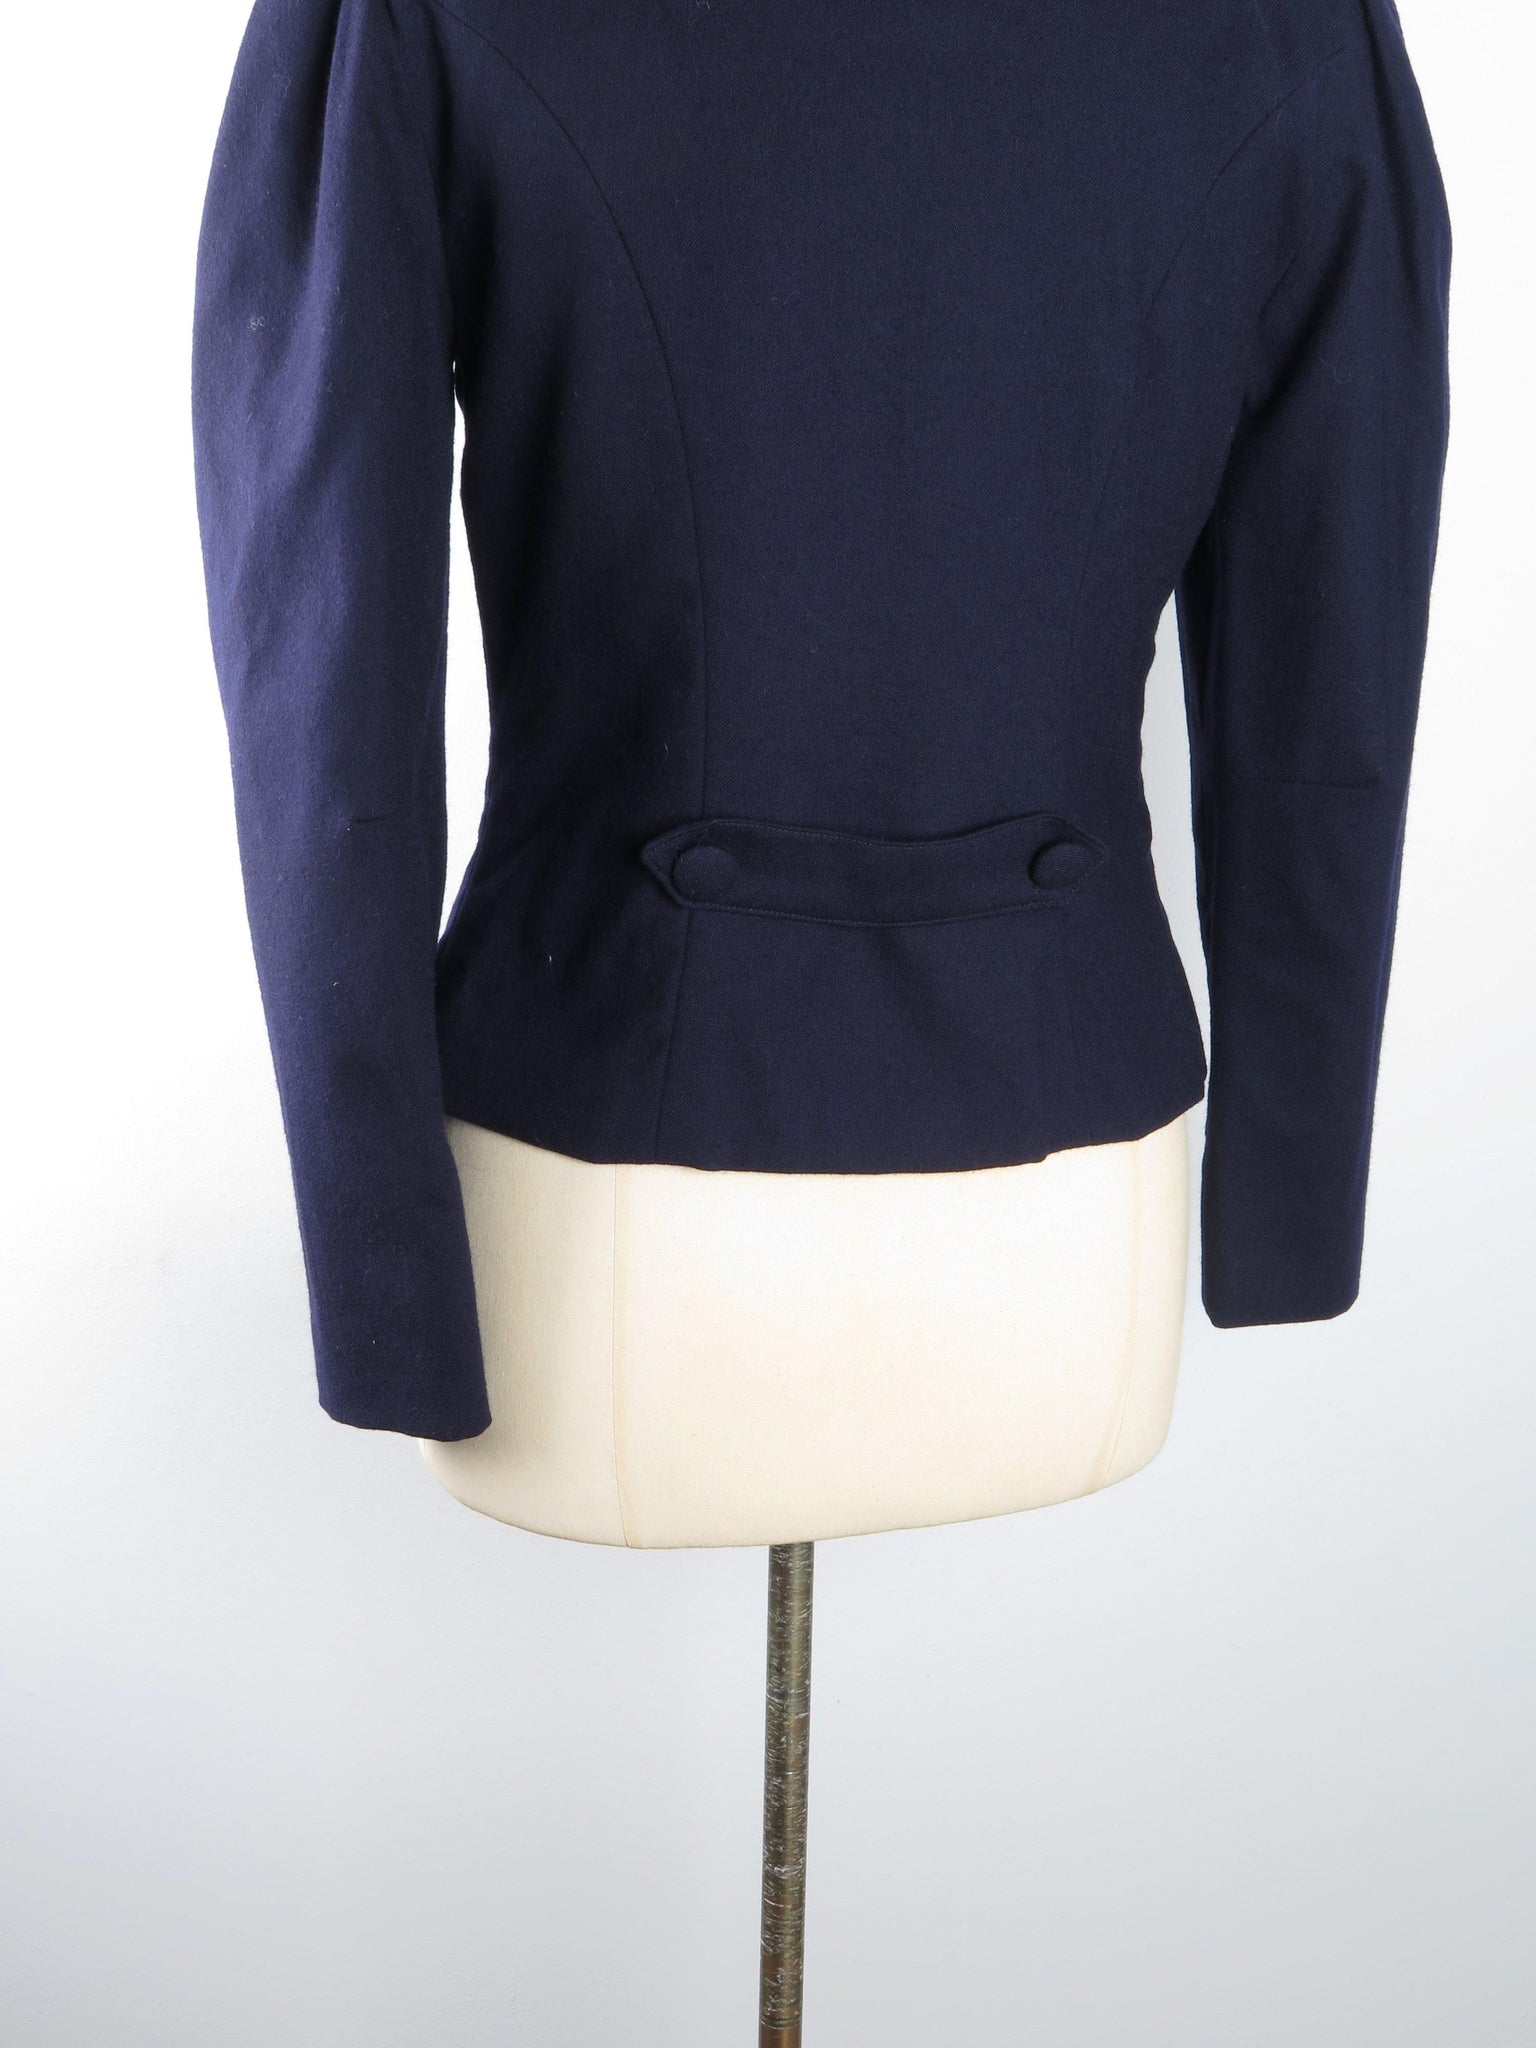 Women’s French Navy Light Wool Jacket 10/12 - The Harlequin